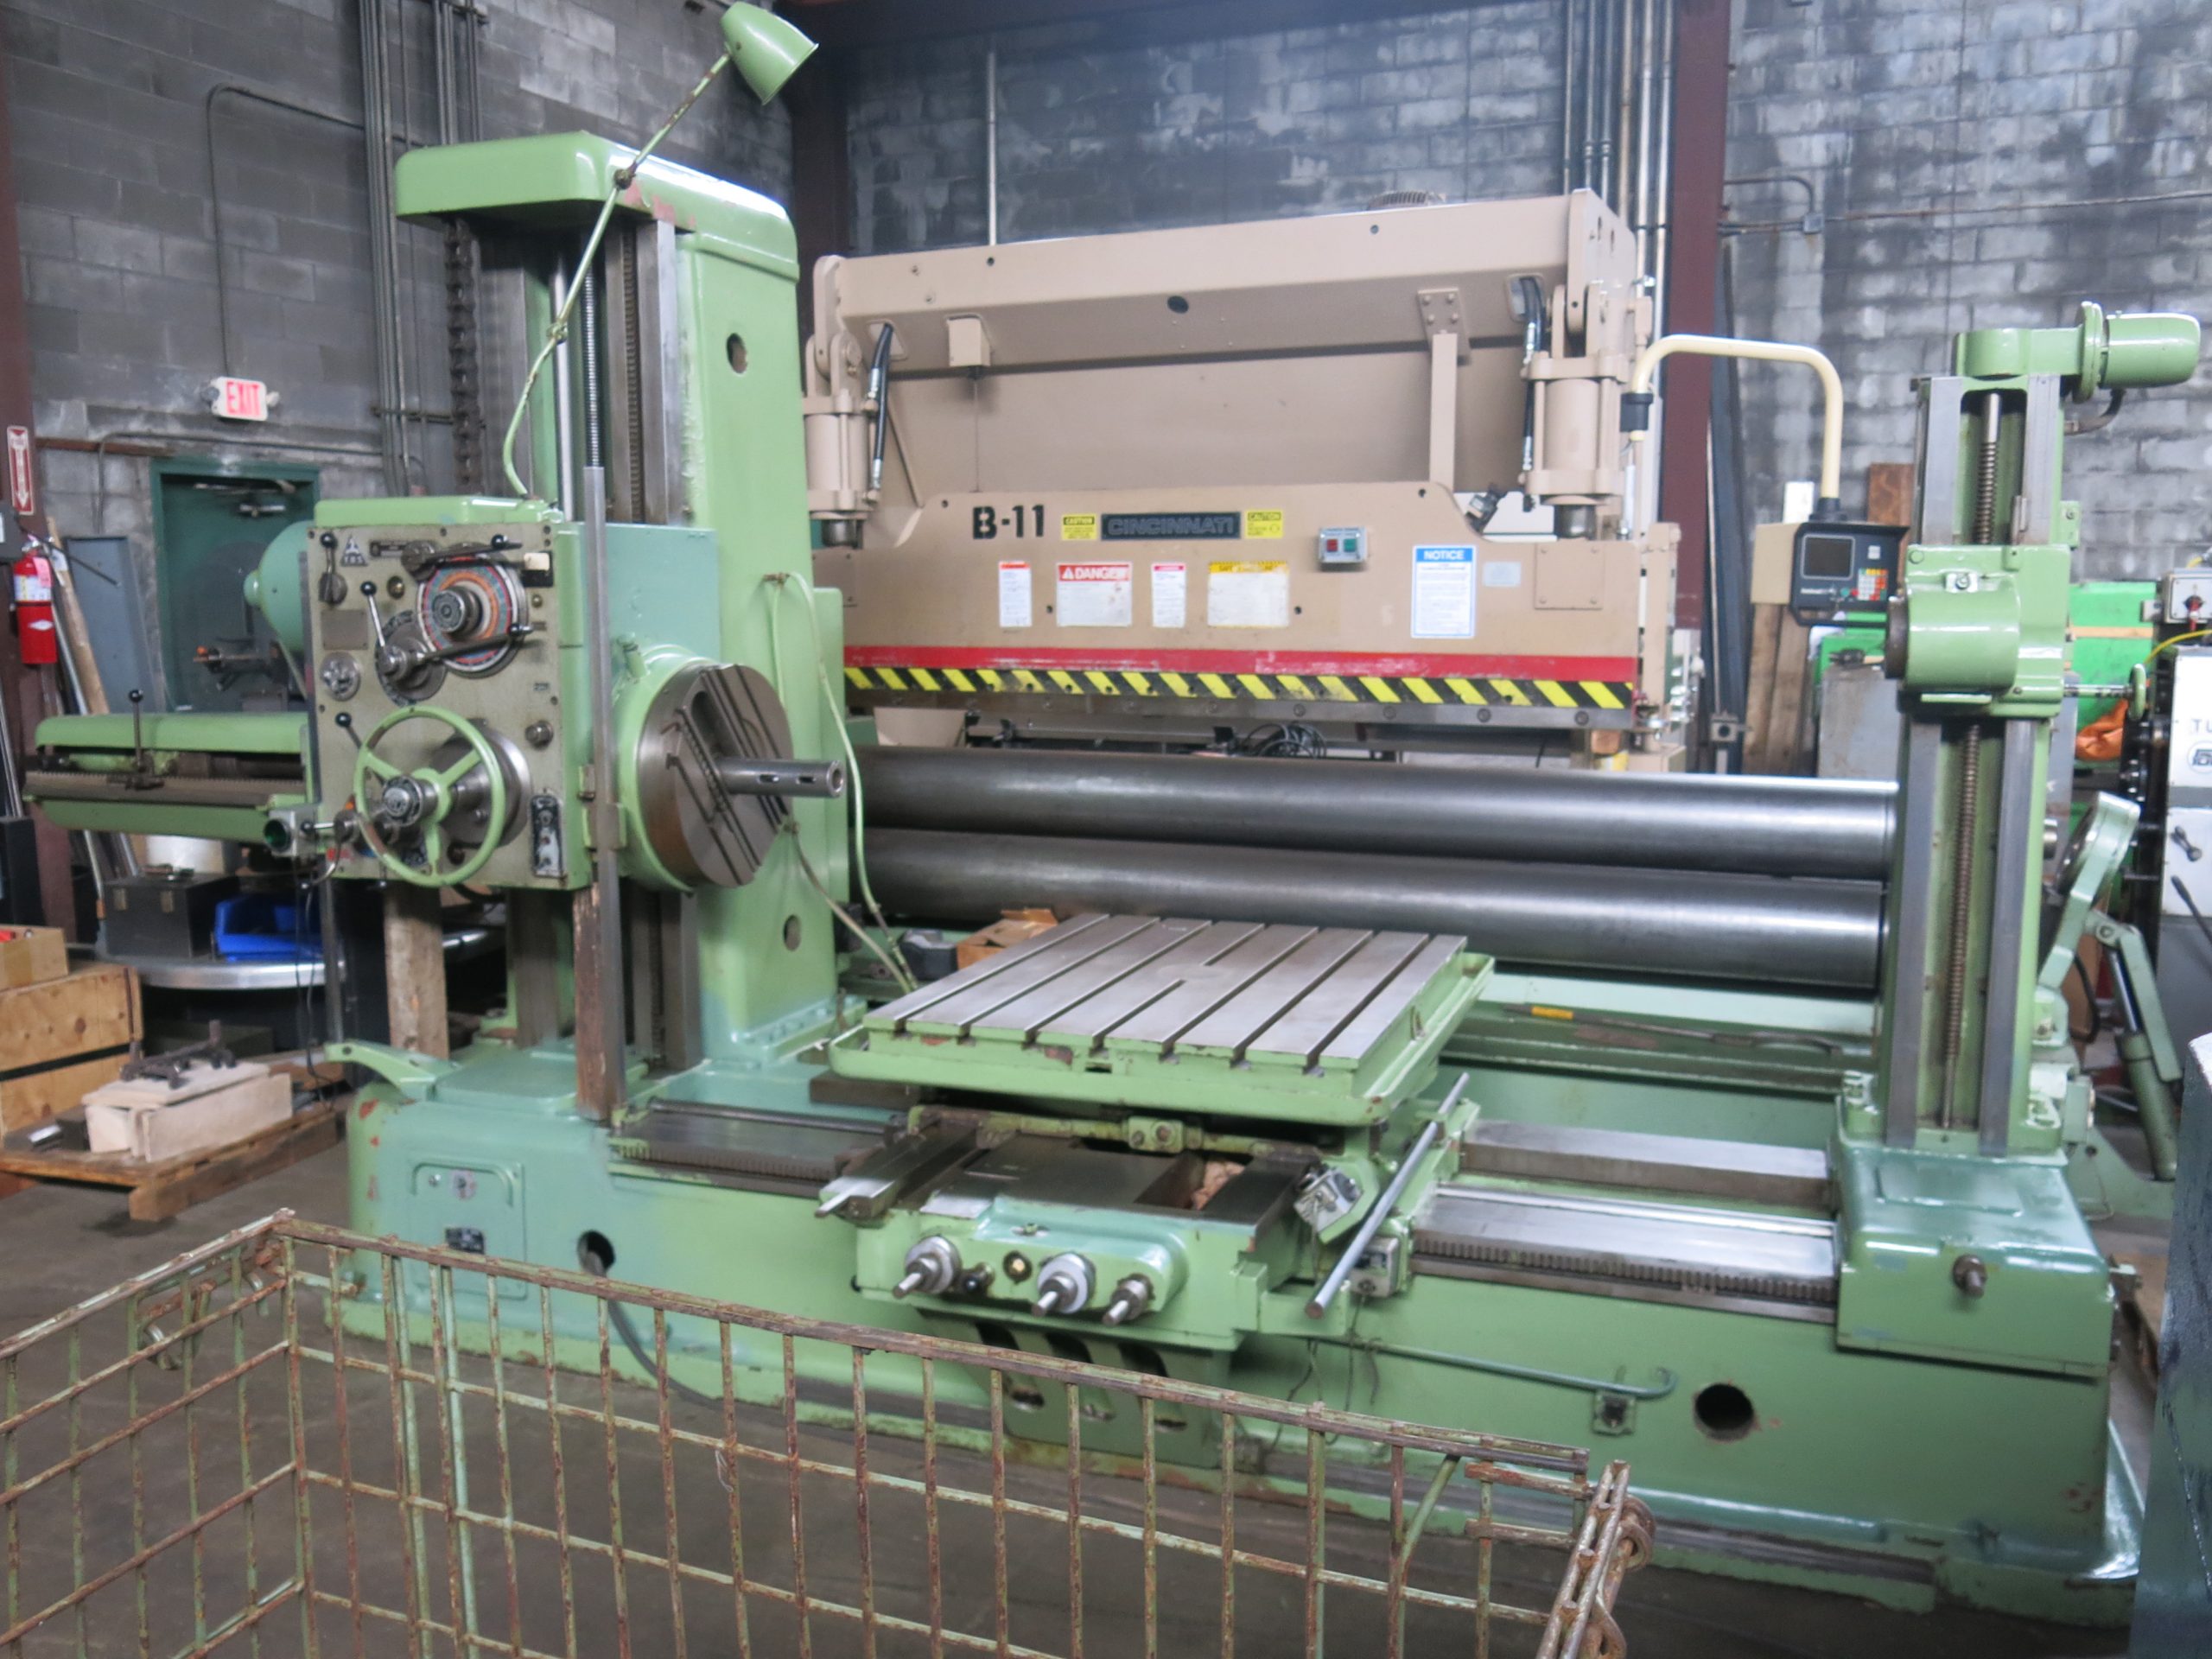 TOS H80-A Horizontal Boring Mill 3.14″ Spindle